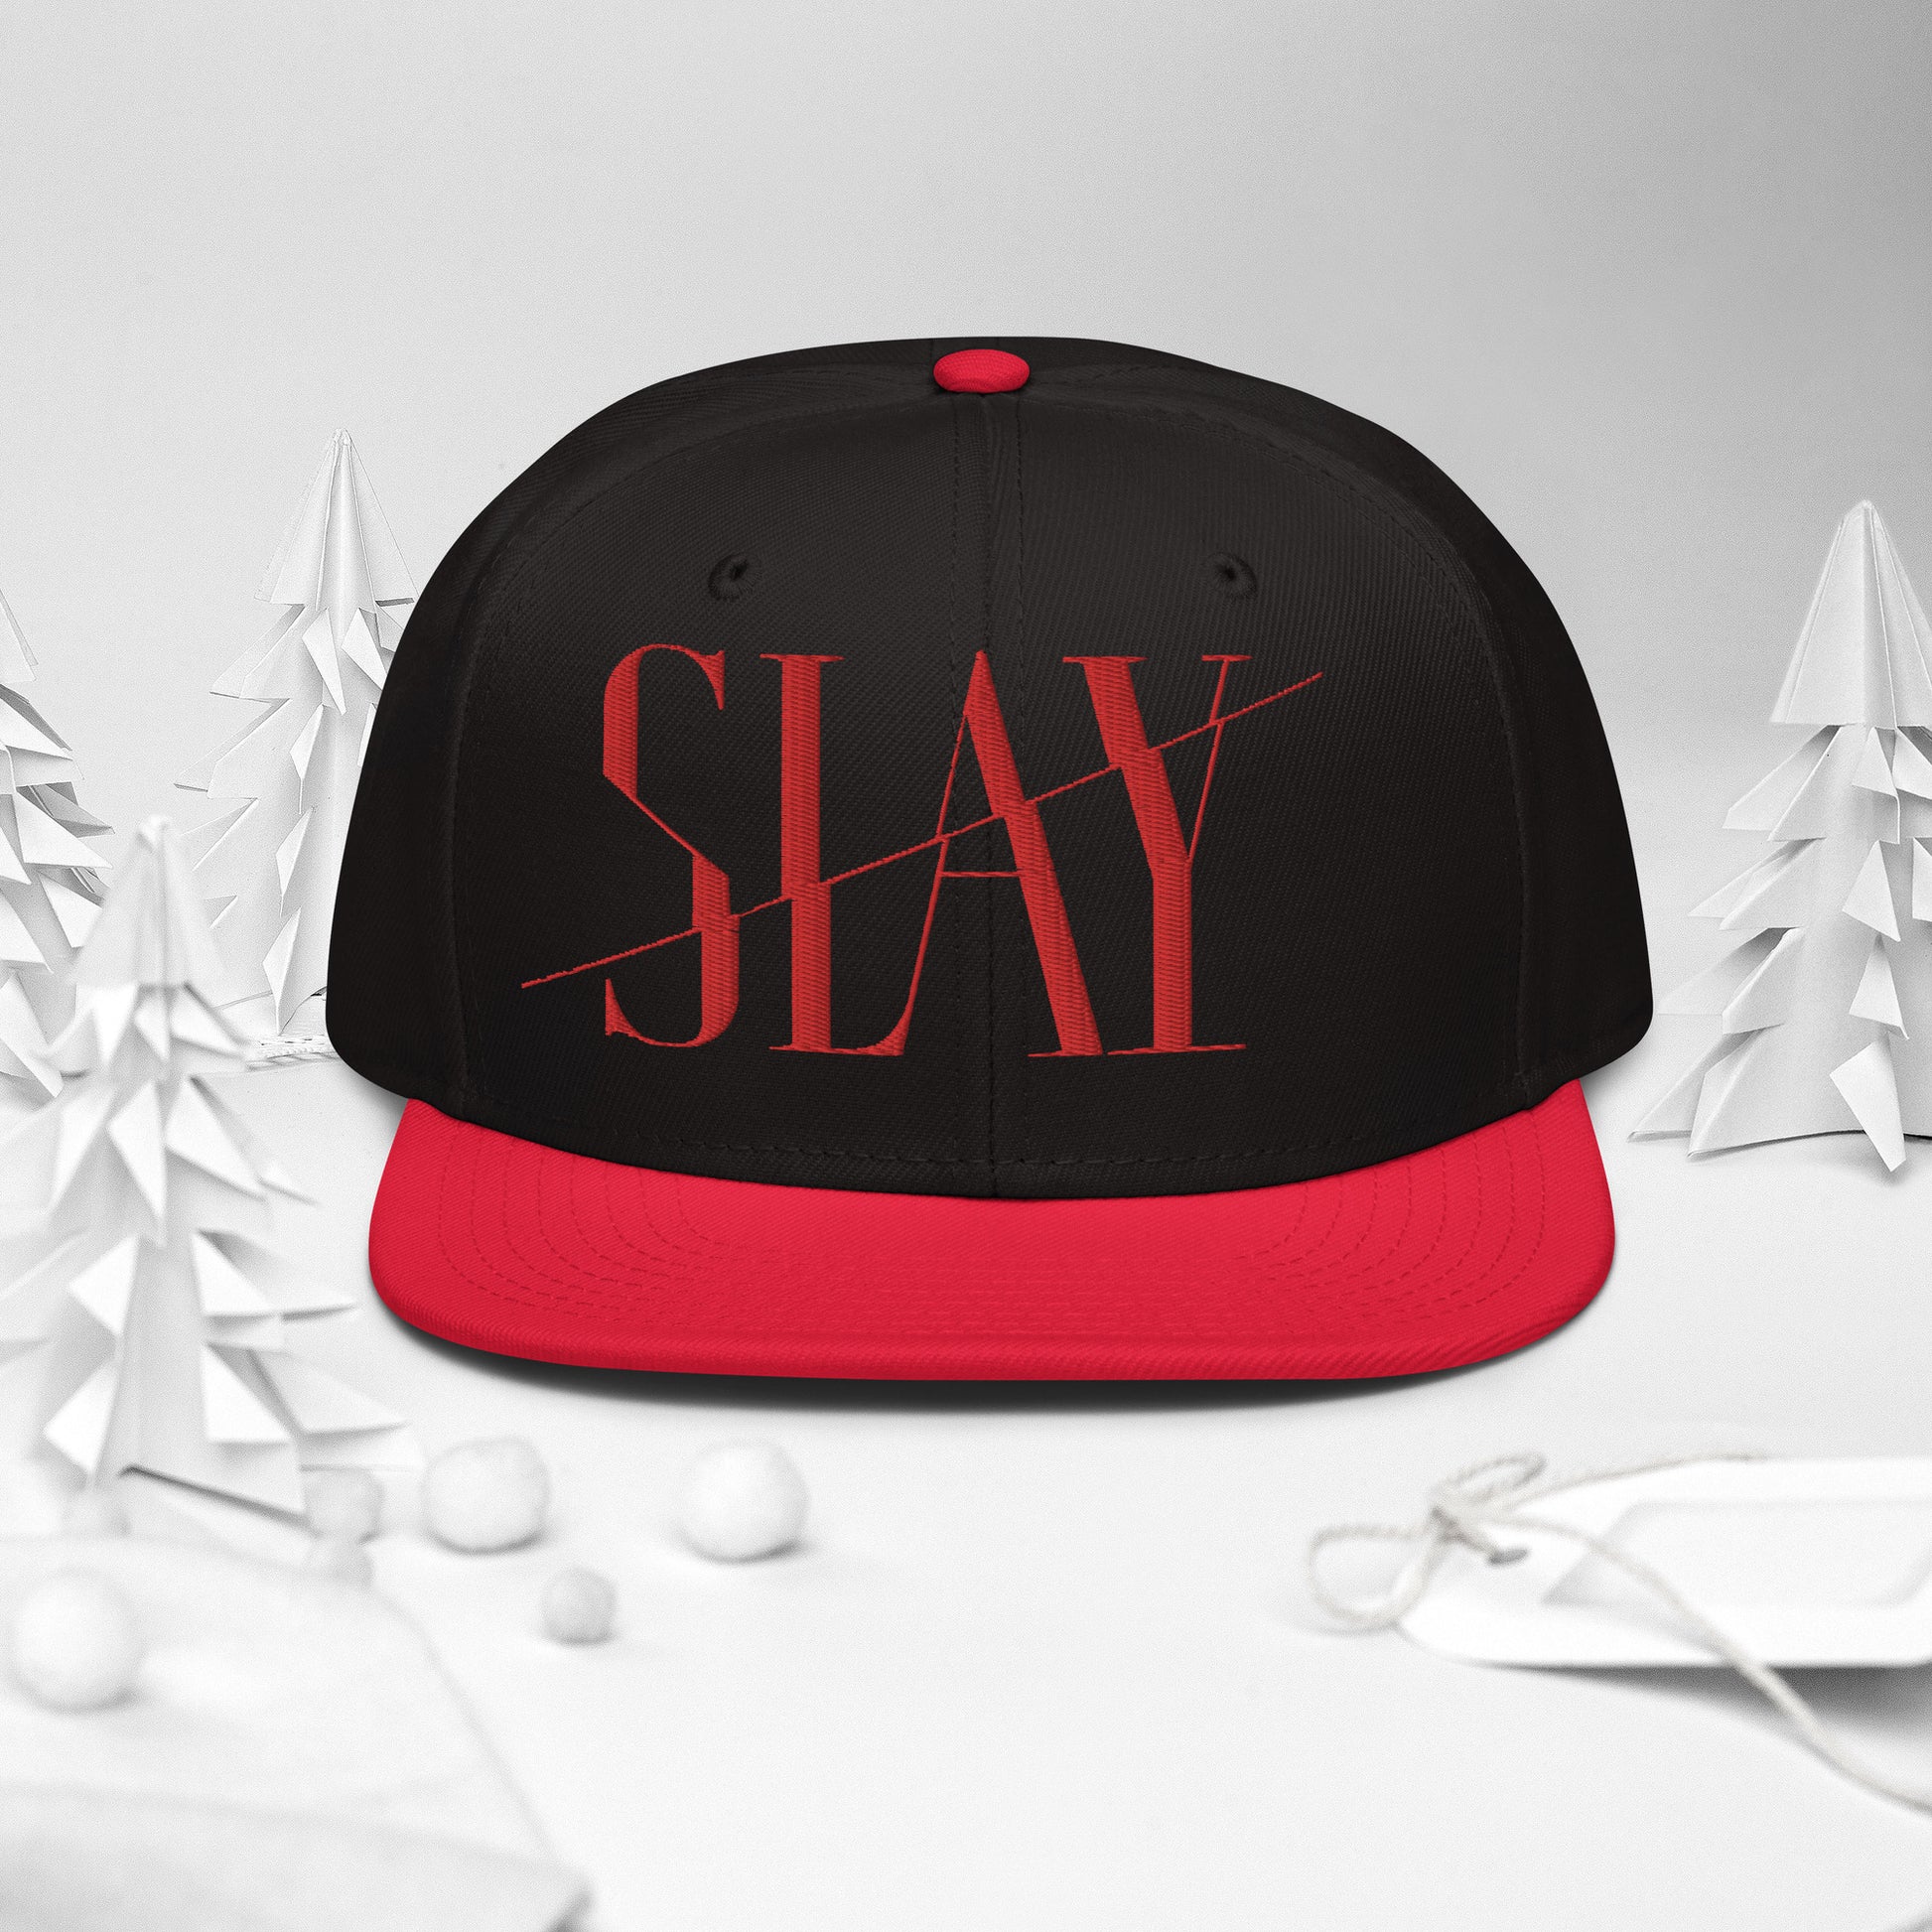 A black and red Snapback Hat with the word "SLAY" embroidered on the front.